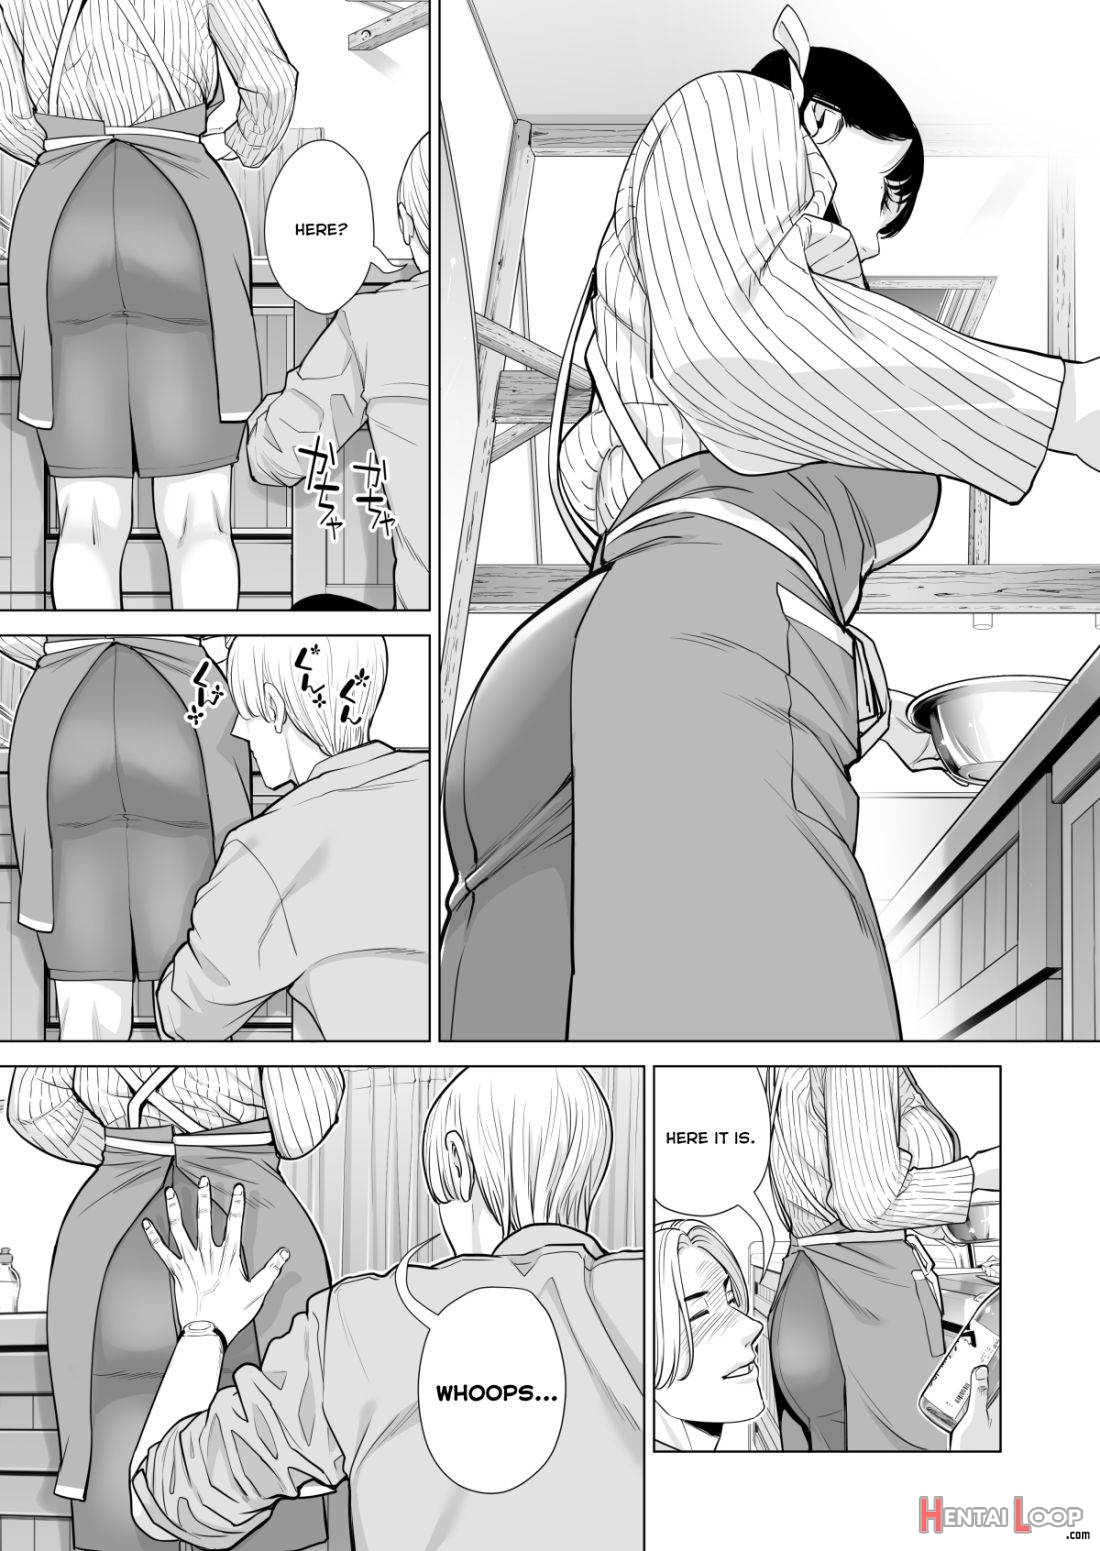 Tsukiyo no Midare Zake (Zenpen) Moonlit Intoxication ~ A Housewife Stolen by a Coworker Besides her Blackout Drunk Husband ~ Chapter 1 page 23